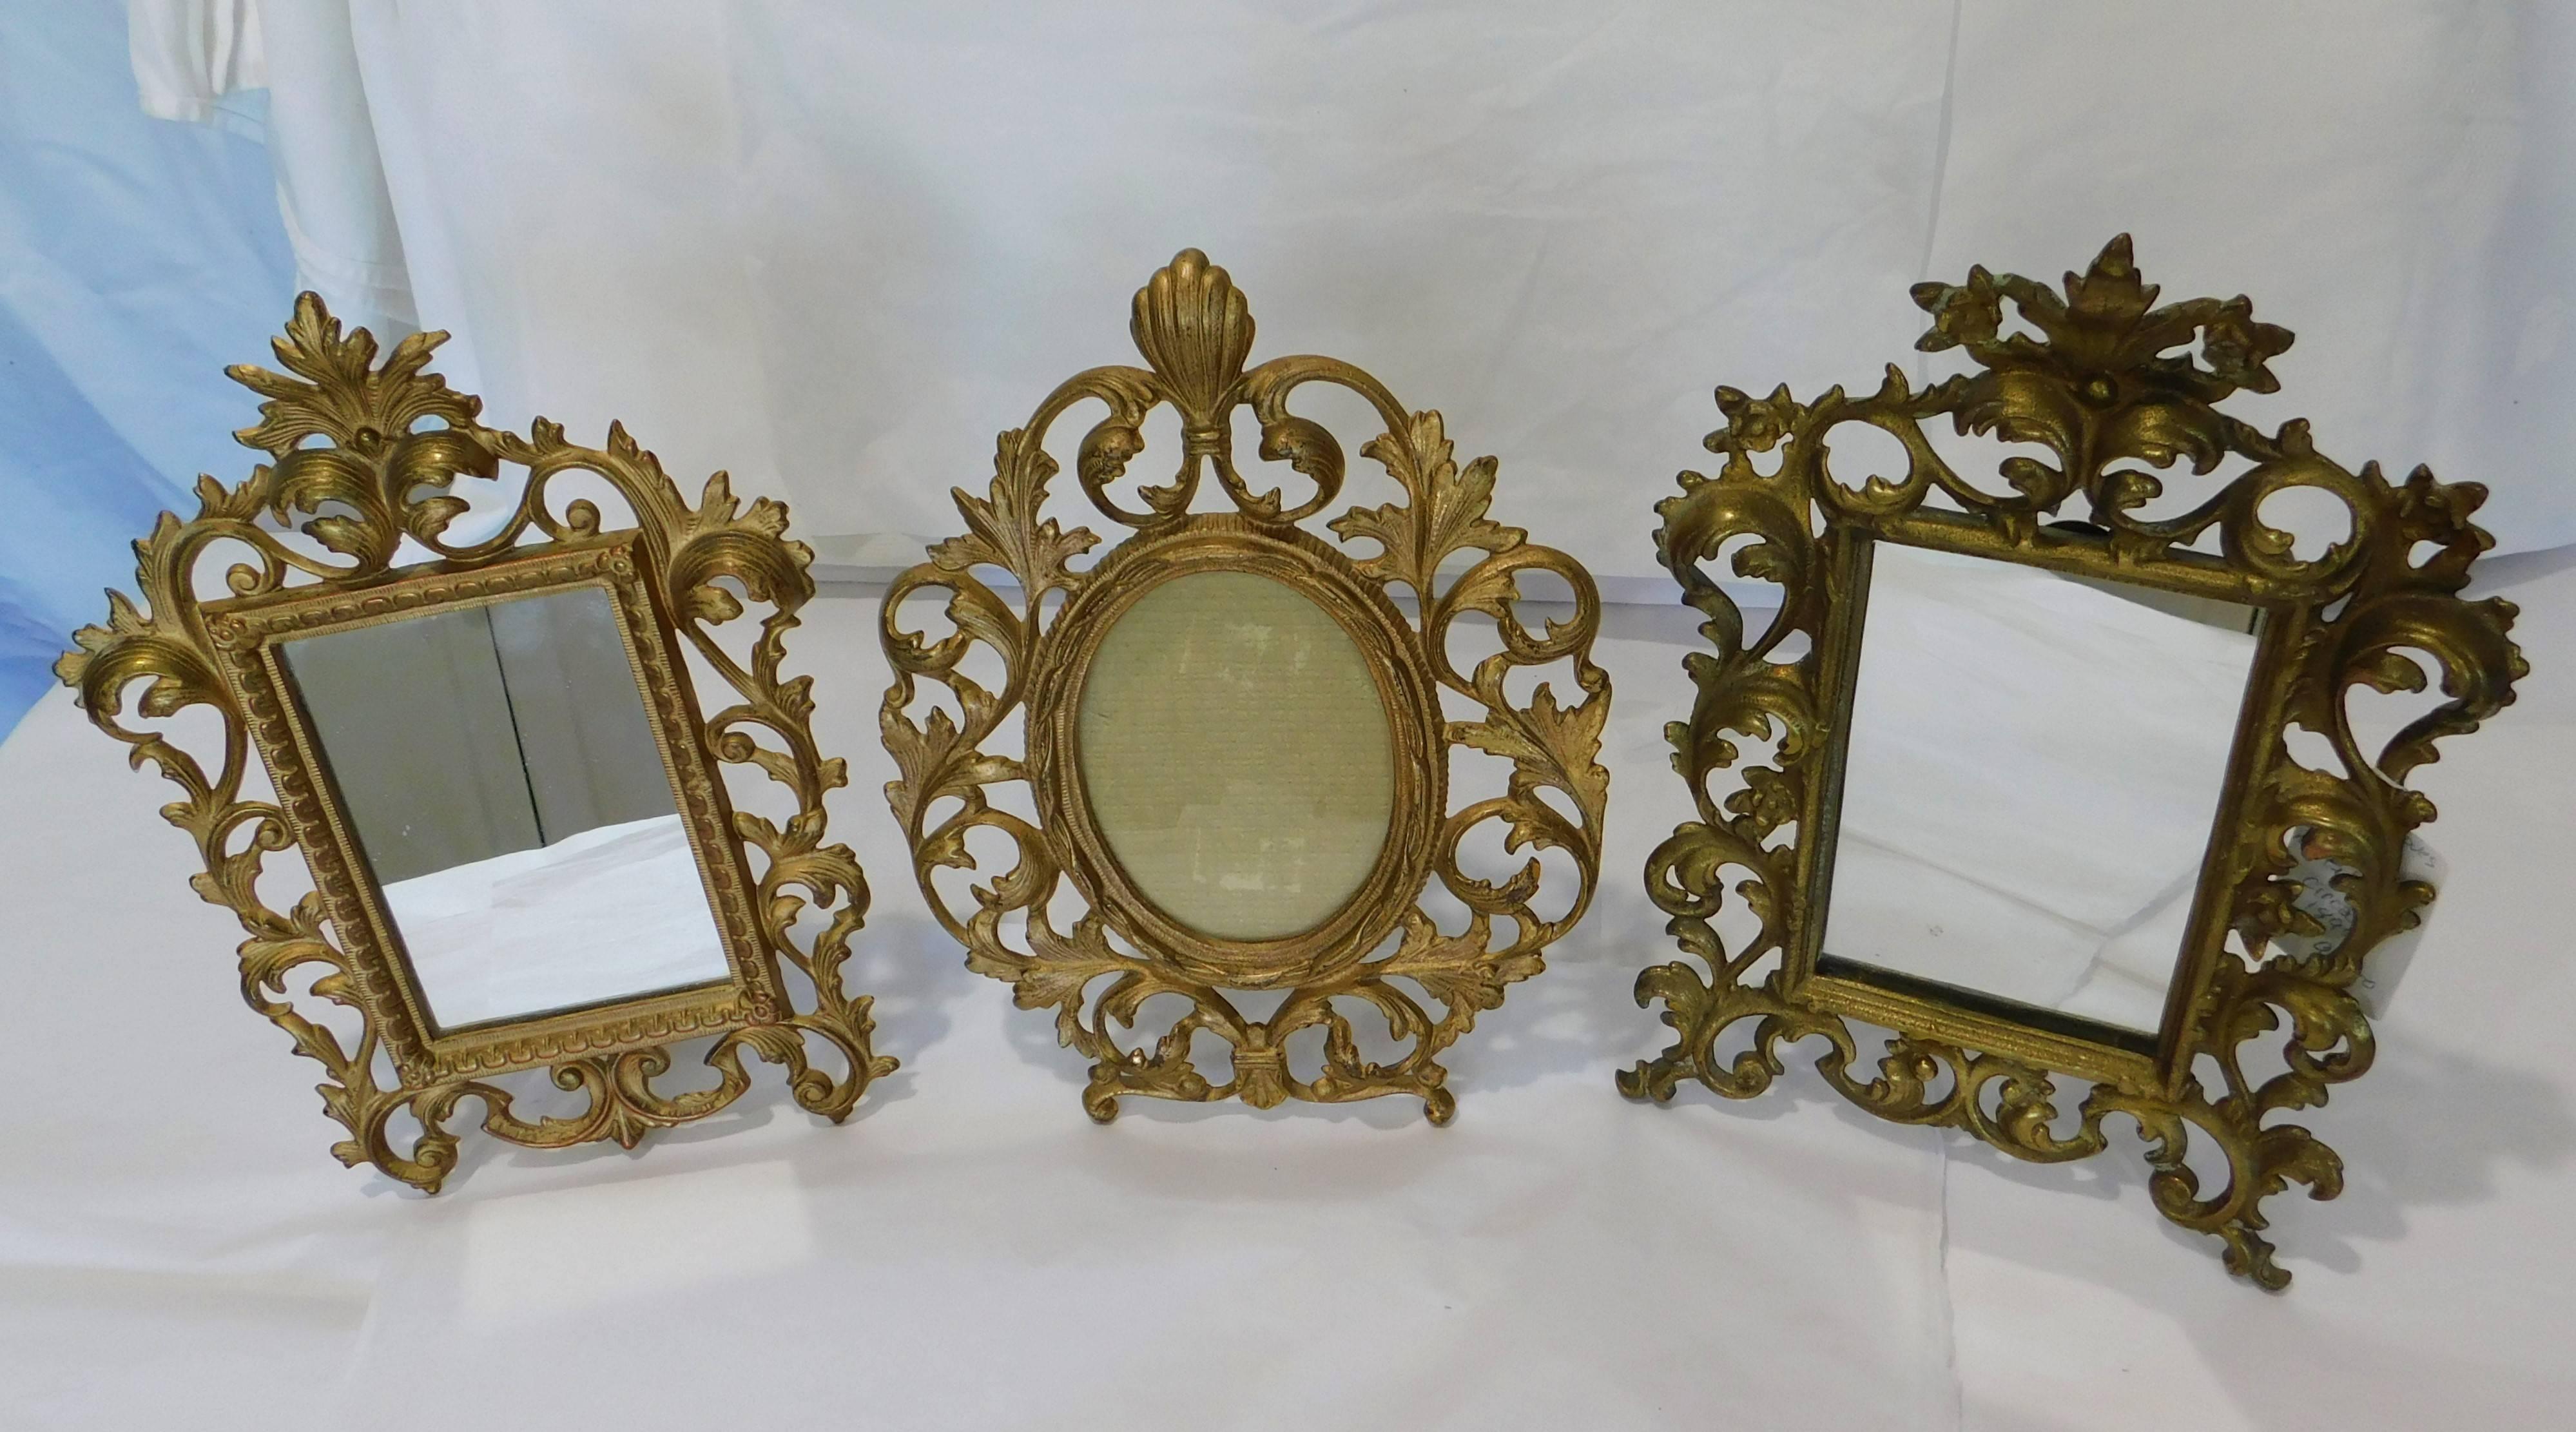 These two English gilt bronzed table vanity mirrors are in very good condition and are in the Rococo style.
Measure: Two rectangle mirrors measure 8 x 11.25 x 1.25 inches and 8 x 11.50 x 3.25 inches. The oval frame is 8.5 x 11 x 4 inches and can be